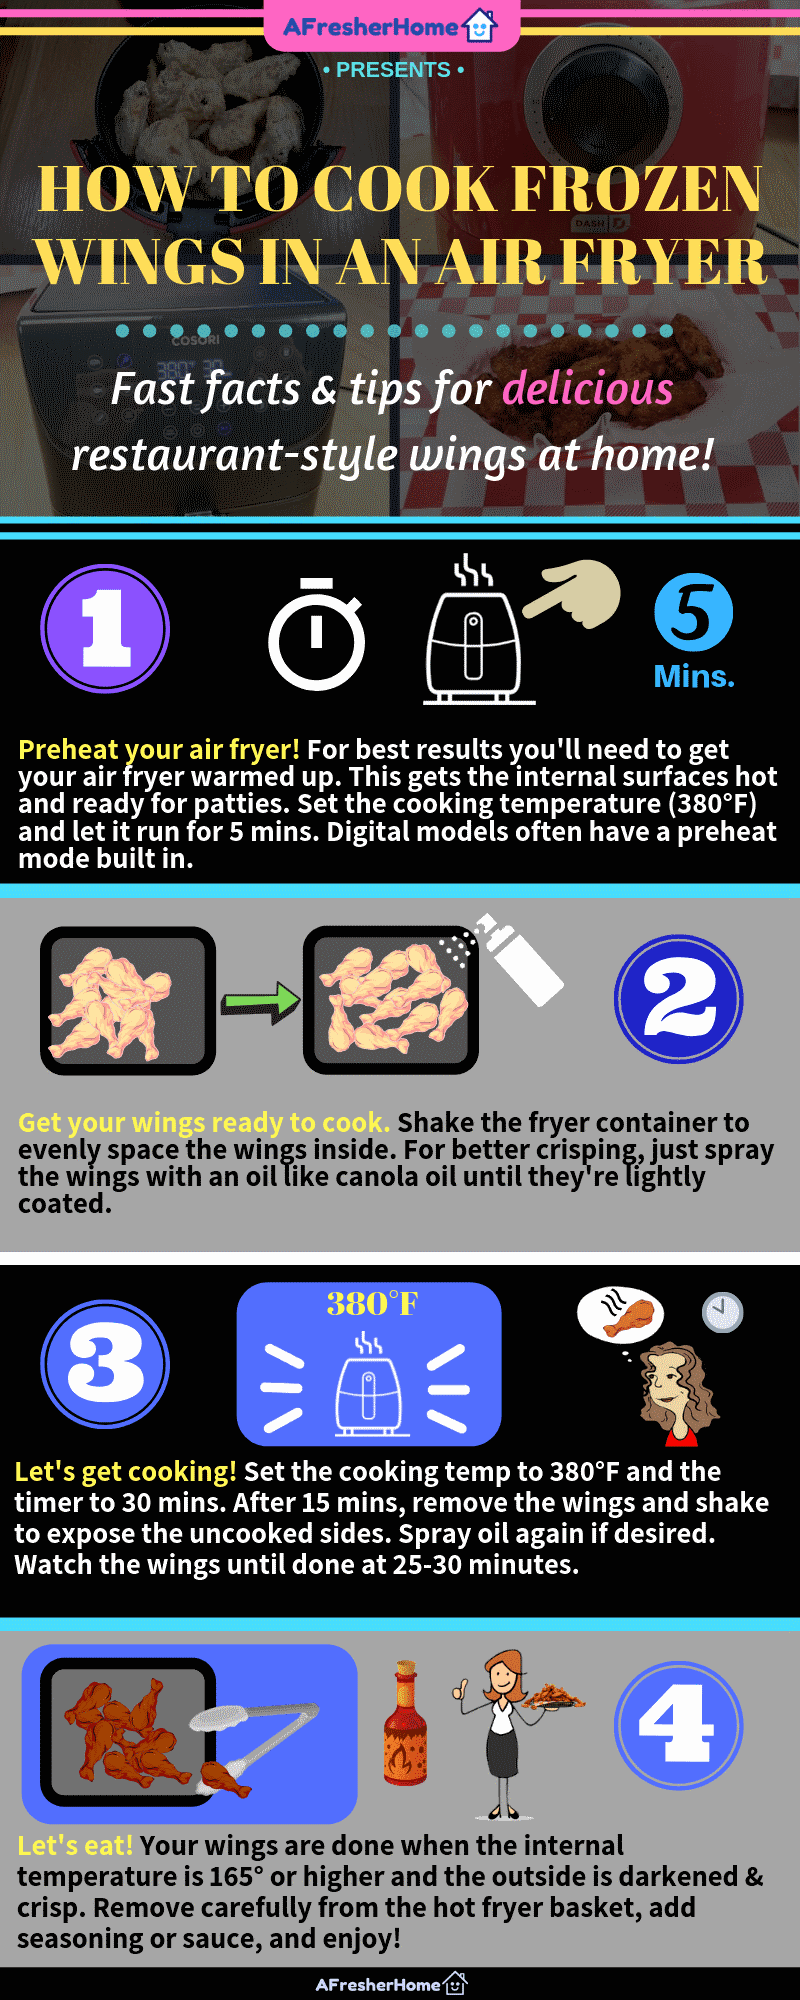 How to make frozen air wings in an air fryer infographic guide